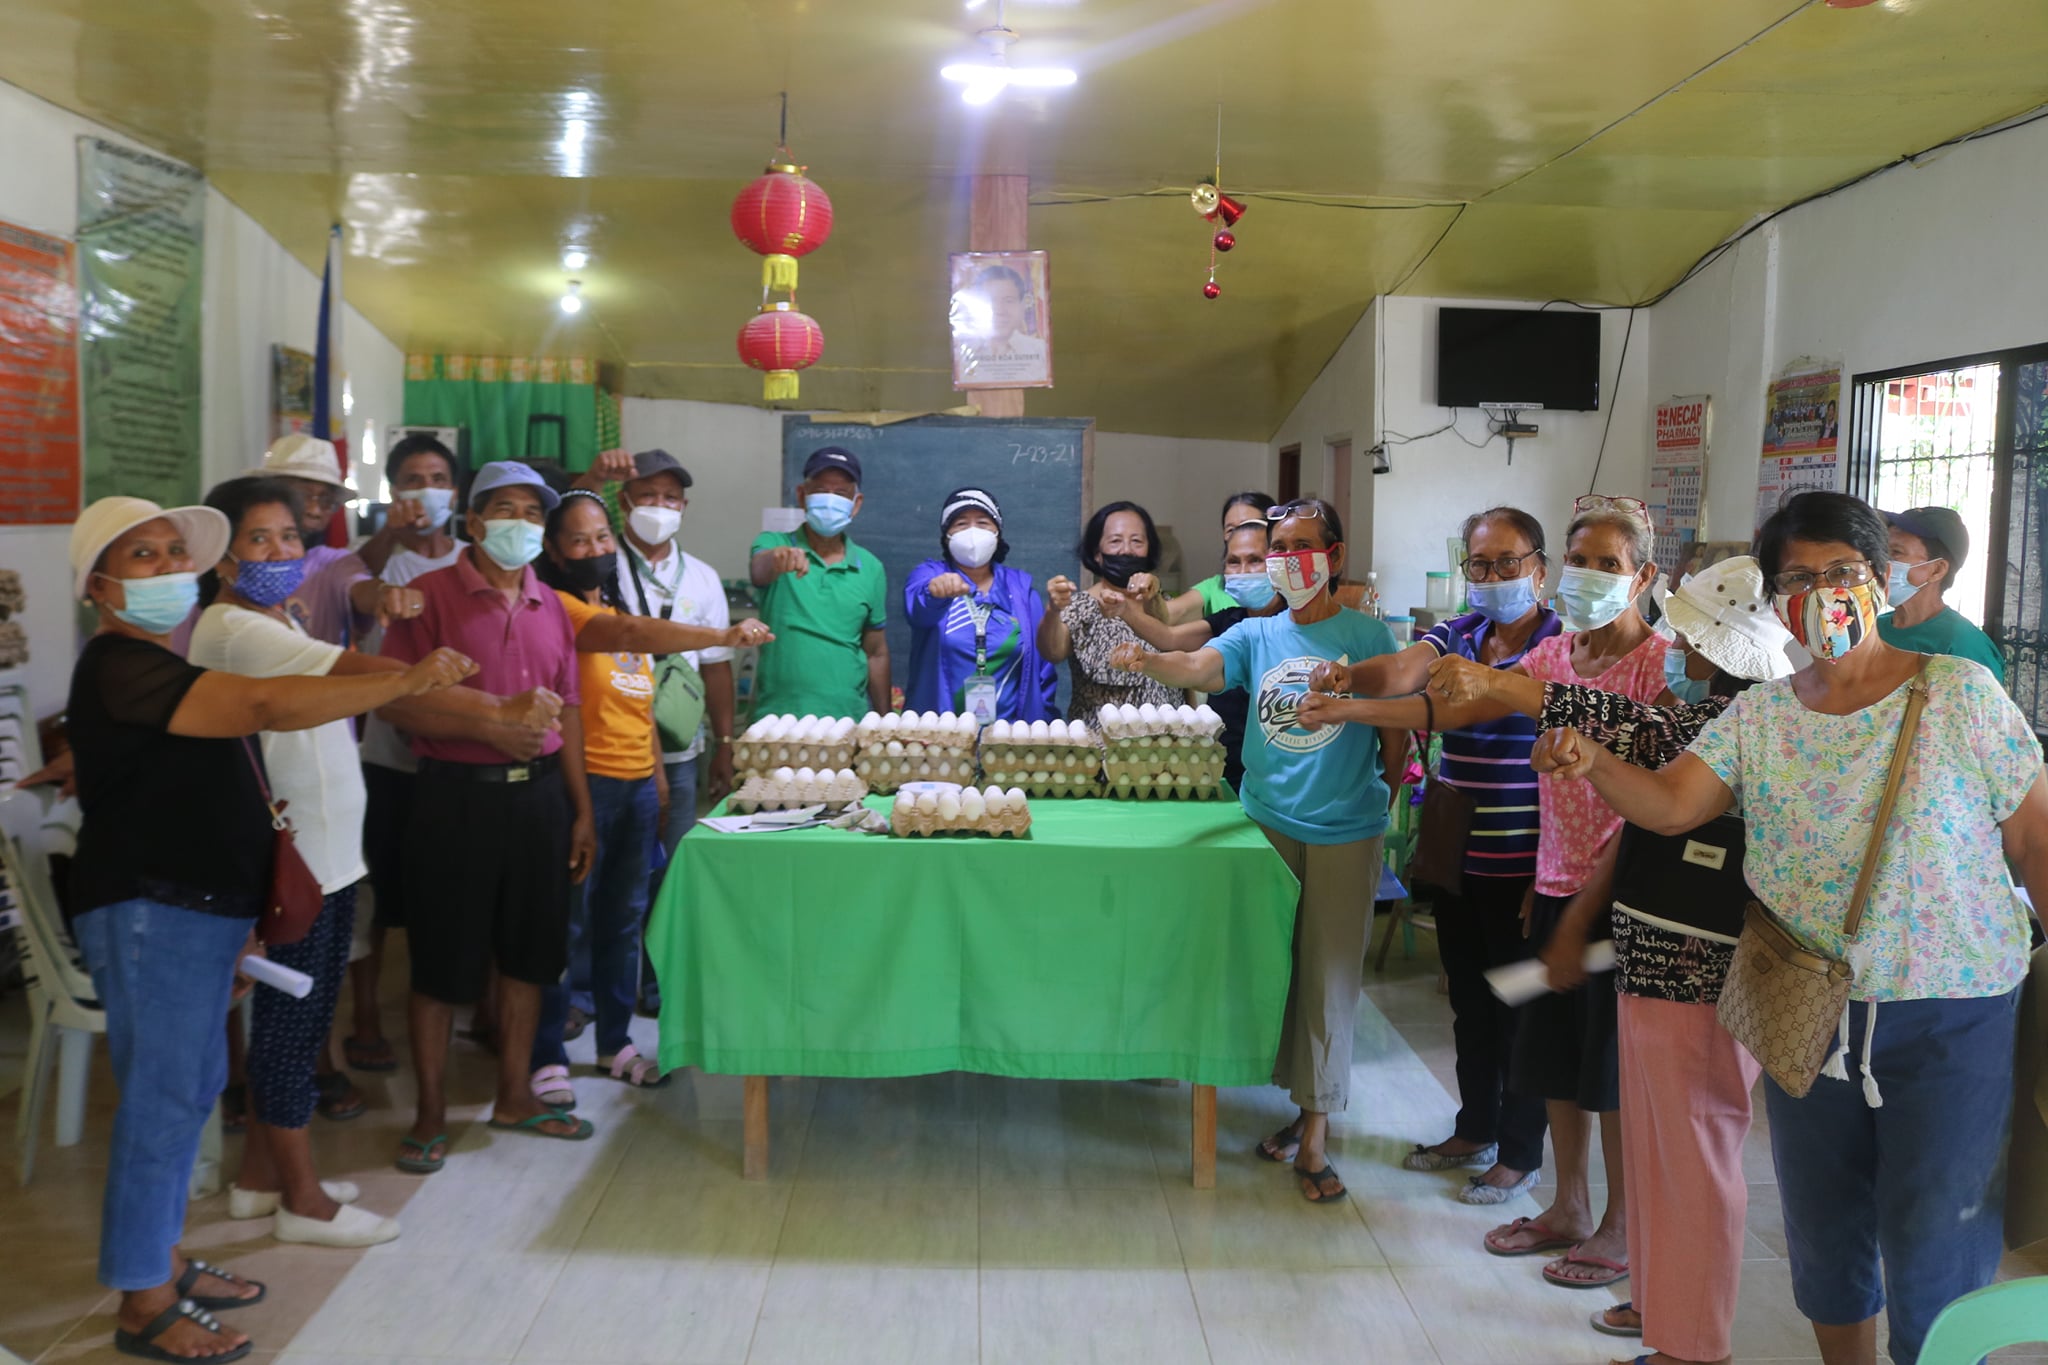 Senior citizens FA generates Php 168K gross income from eggs